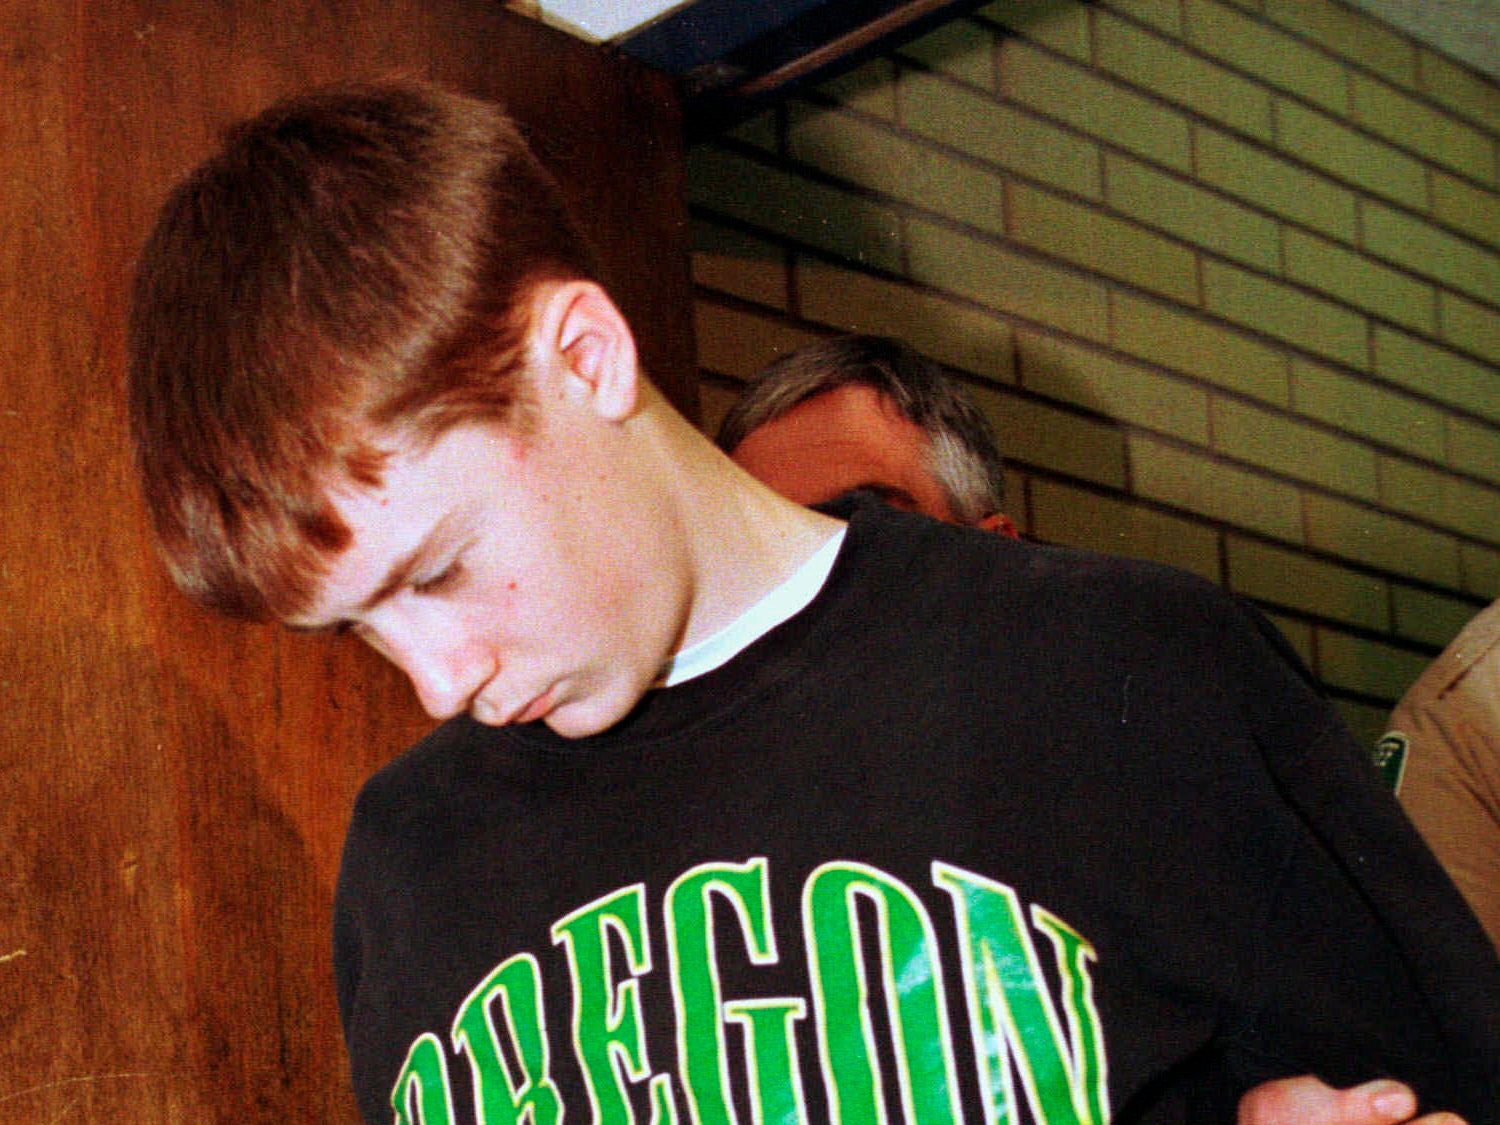 In this May 22, 1998, file photo, Thurston High School student Kip Kinkel, 15, is led to his arraignment in Eugene, Ore.